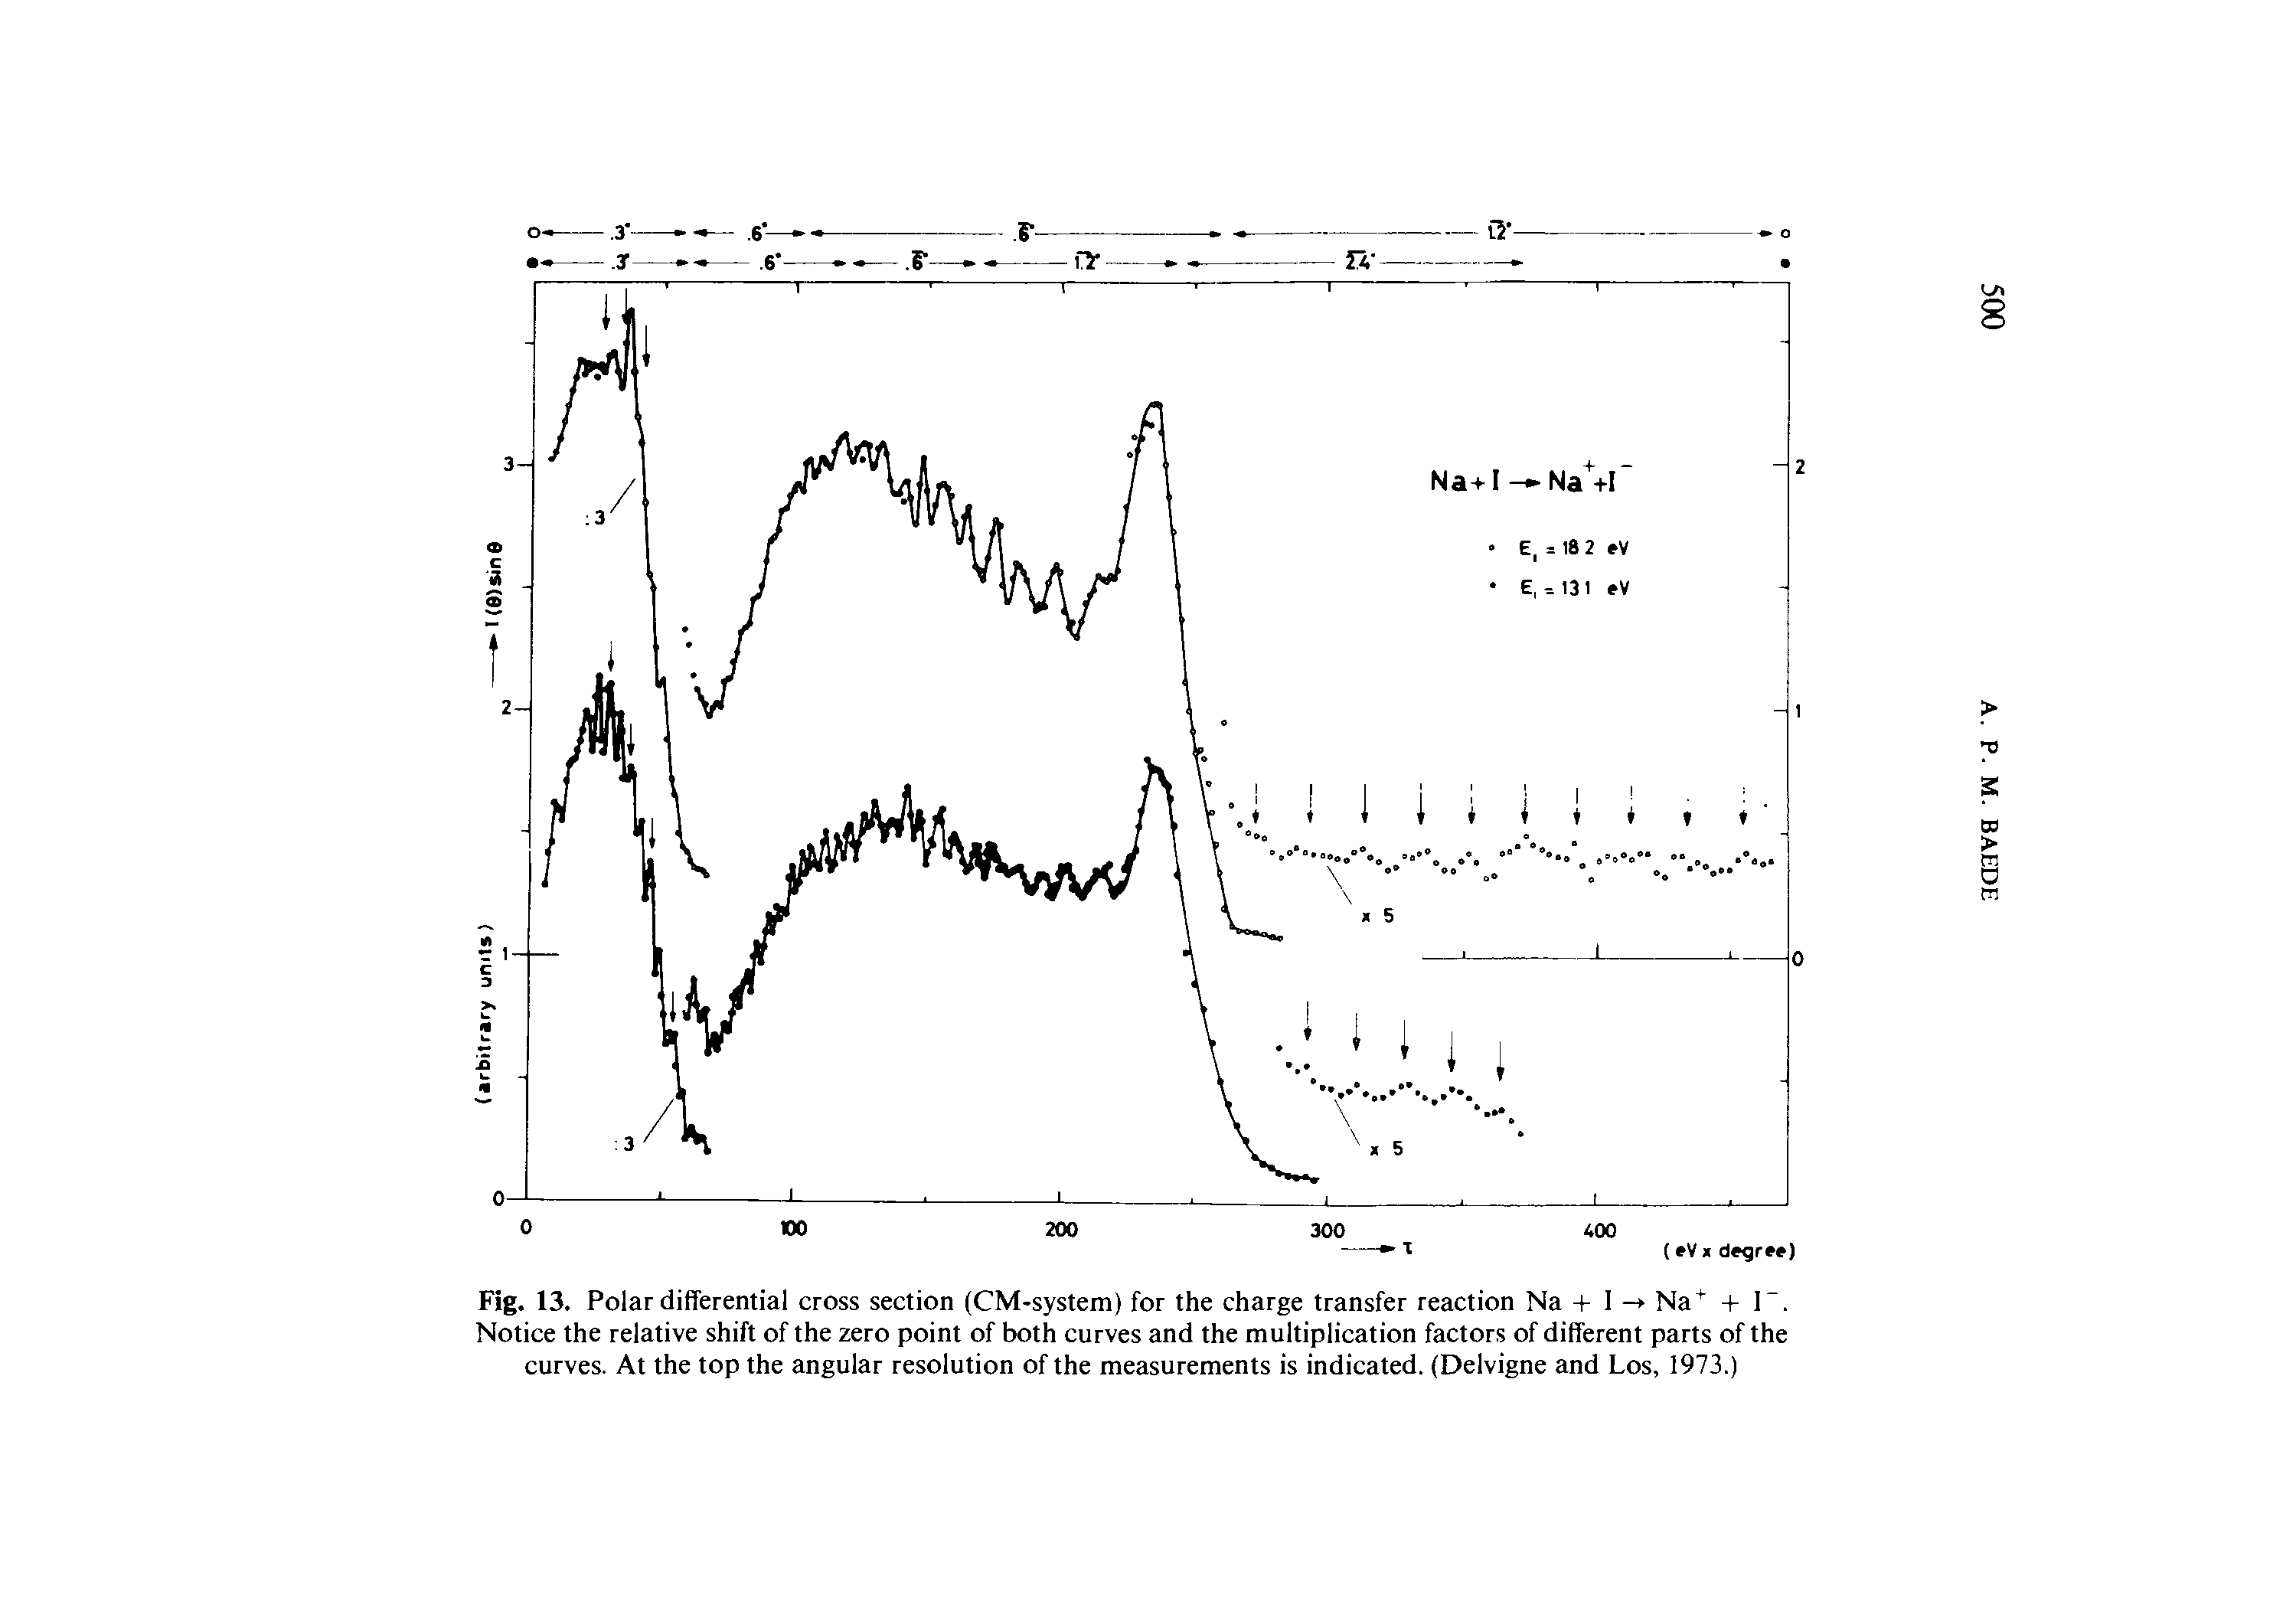 Fig. 13. Polar differential cross section (CM-system) for the charge transfer reaction Na + 1 - Na+ + 1. Notice the relative shift of the zero point of both curves and the multiplication factors of different parts of the curves. At the top the angular resolution of the measurements is indicated. (Delvigne and Los, 1973.)...